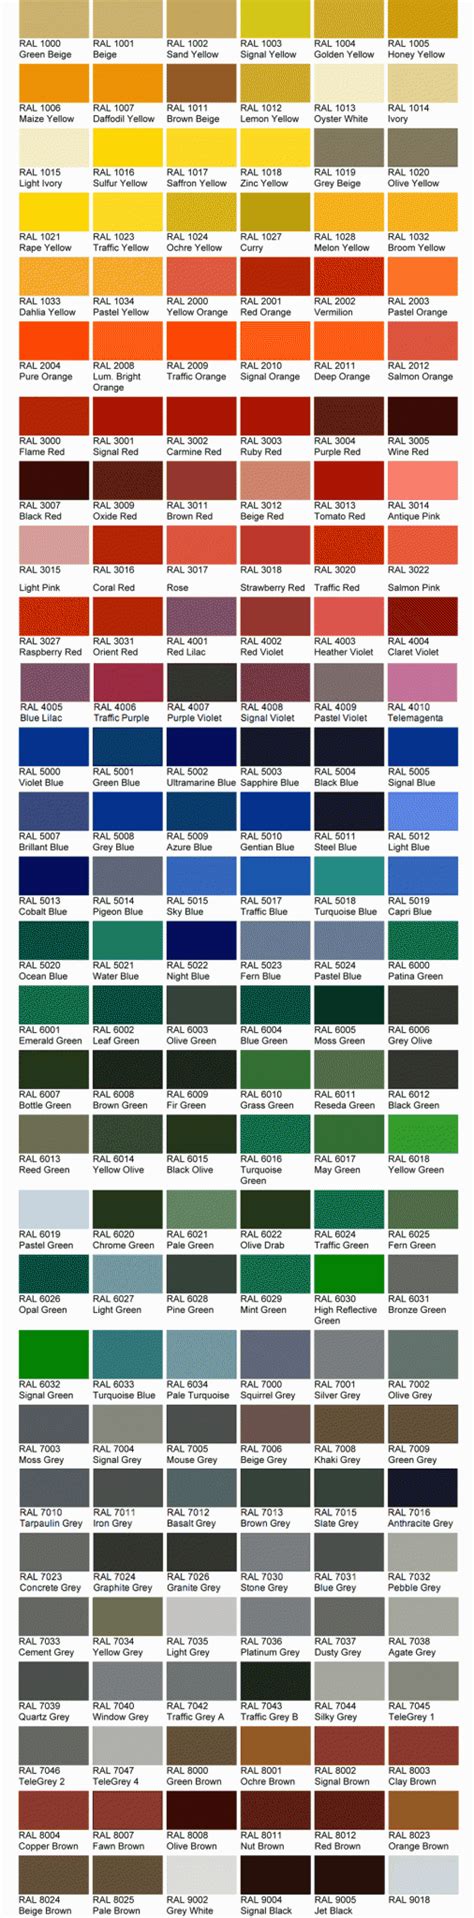 Gallery Of Ral Colour Chart 1 Ral Color Chart Ral Colours Chart Ral